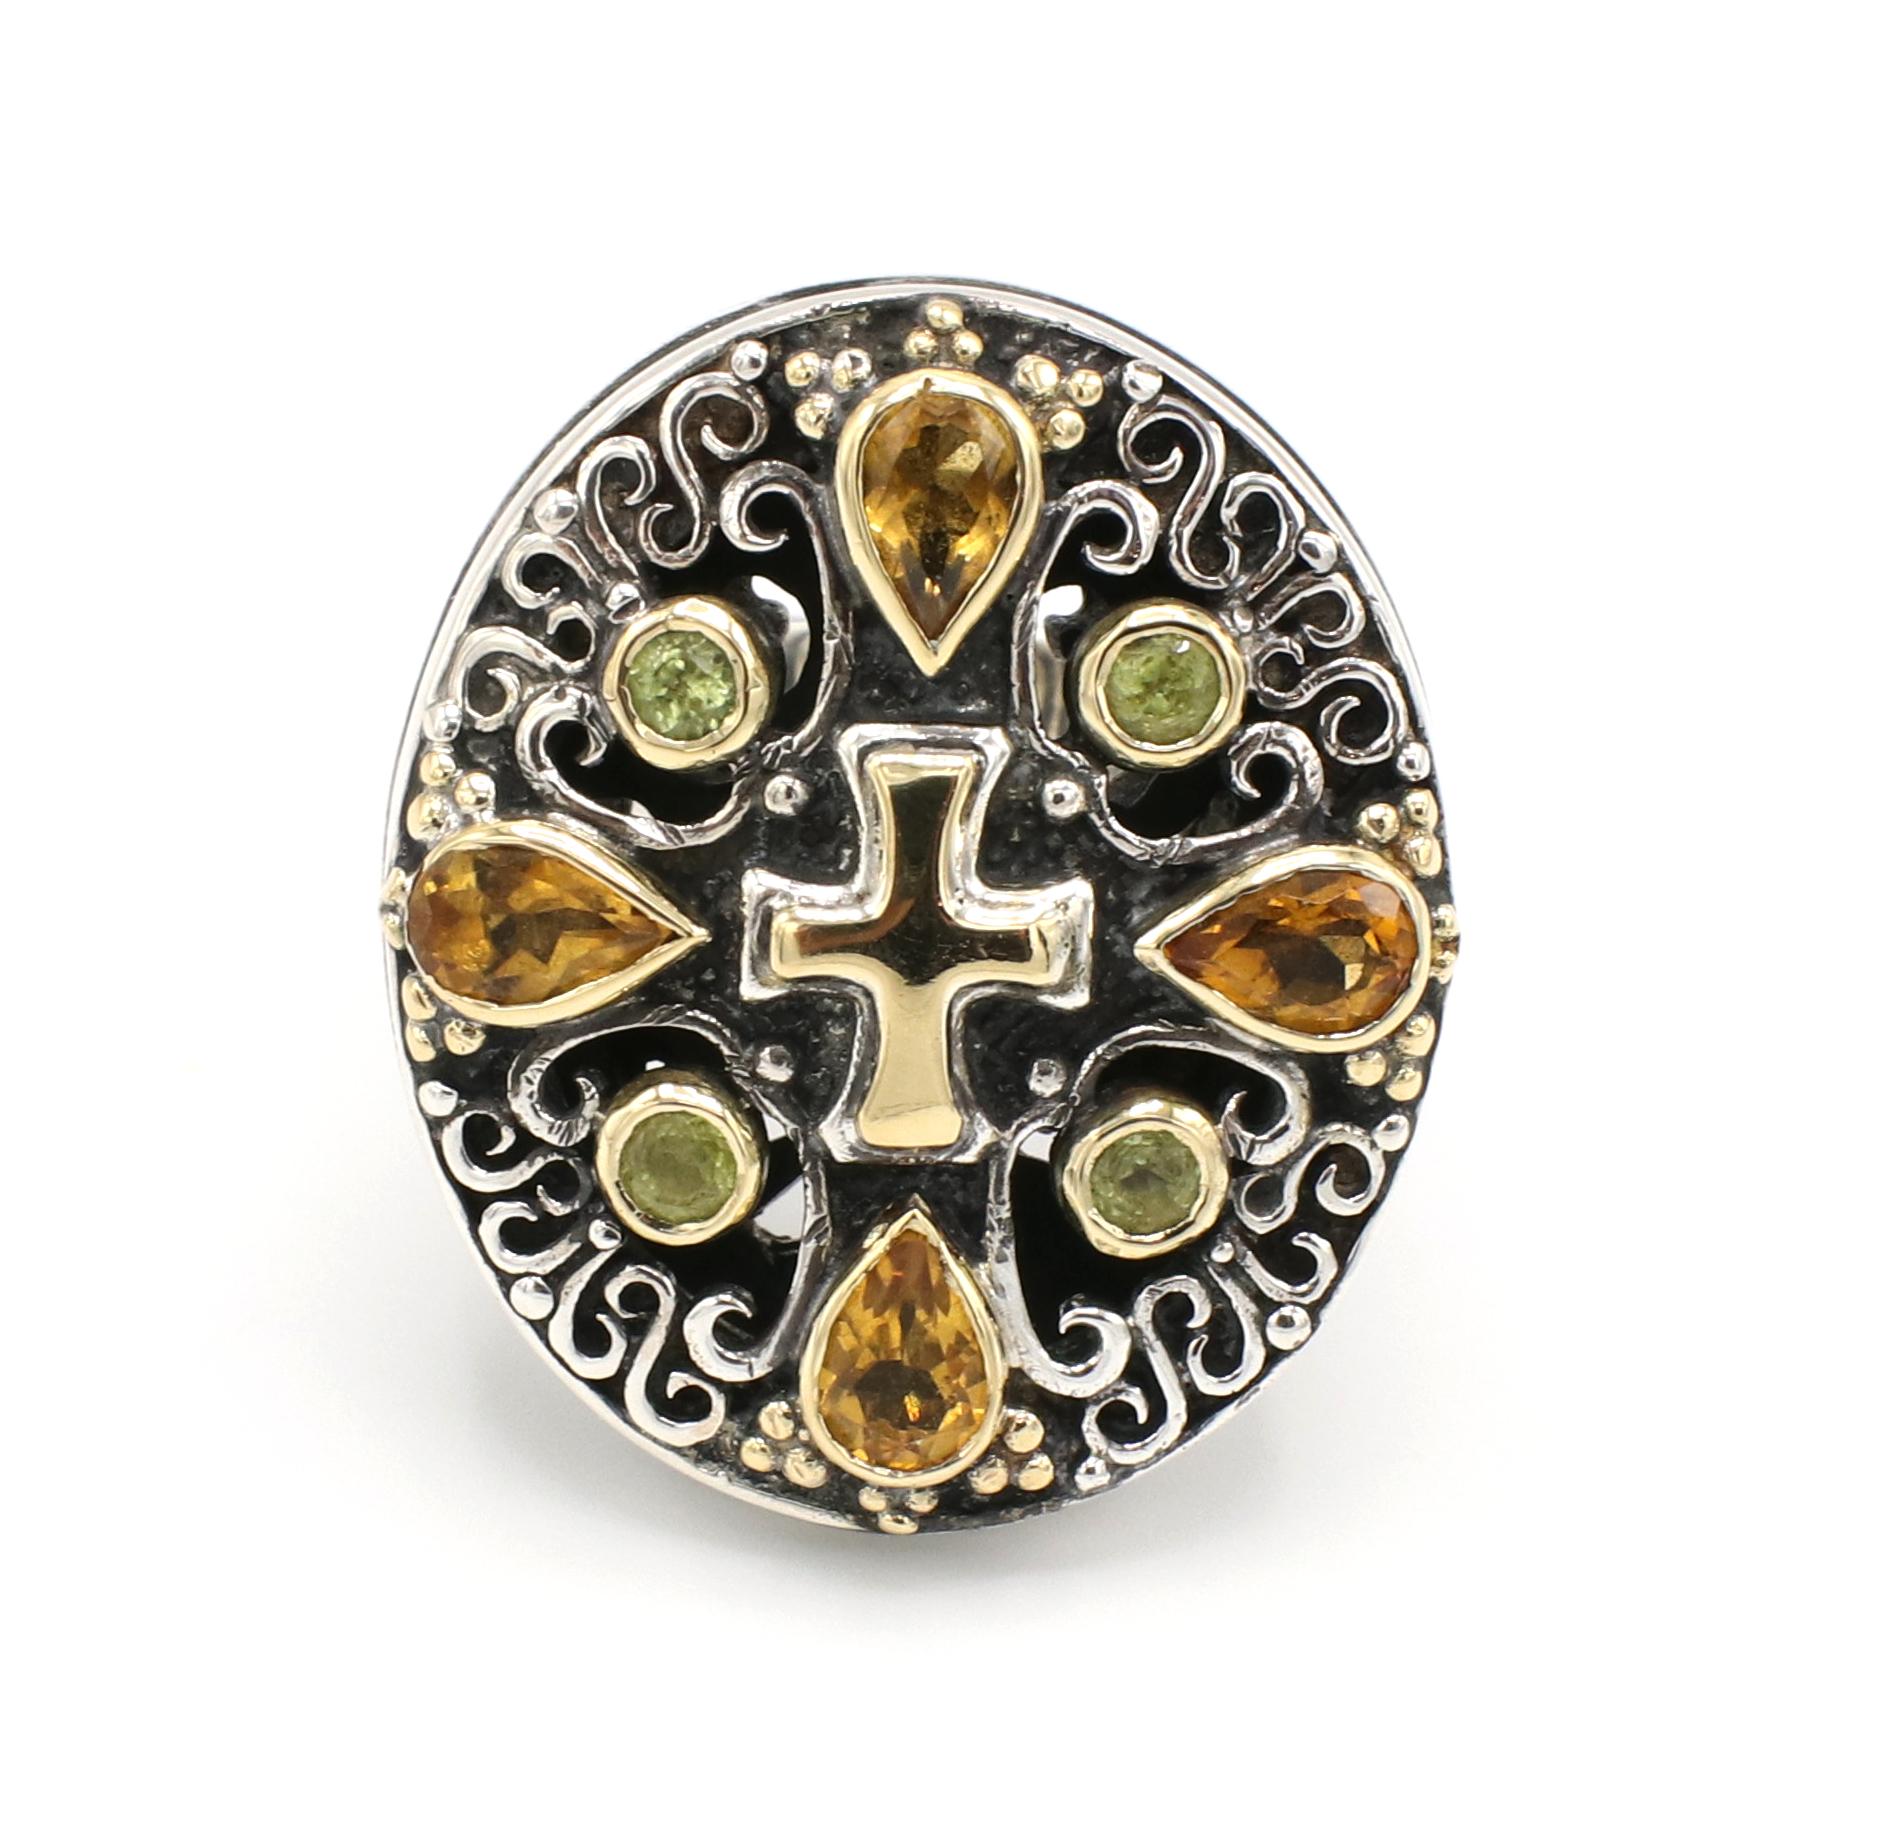 Konstantino Sterling Silver & Gold Multi-Colored Gemstone Cross Ring 
Metal: Sterling silver and 18k yellow gold
Weight: 30.22 grams
Top: 30 x 25mm
Size: 7 (US)
Gemstones: Citrine, peridot
